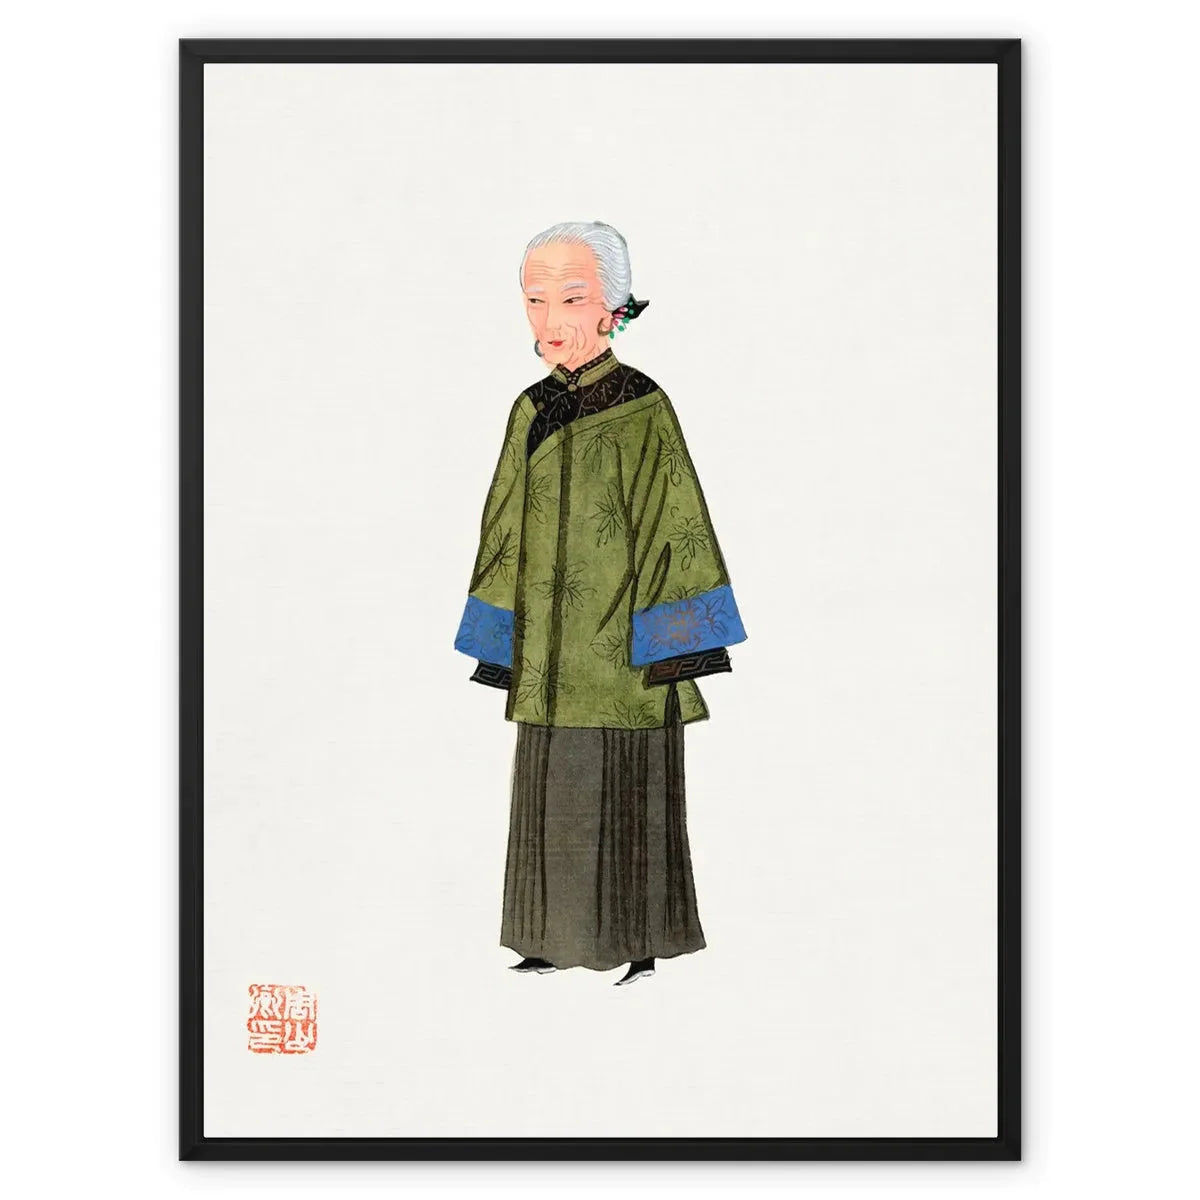 Chinese Grand Dame Framed Canvas - 24’x32’ / Black Frame / White Wrap - Posters Prints & Visual Artwork - Aesthetic Art